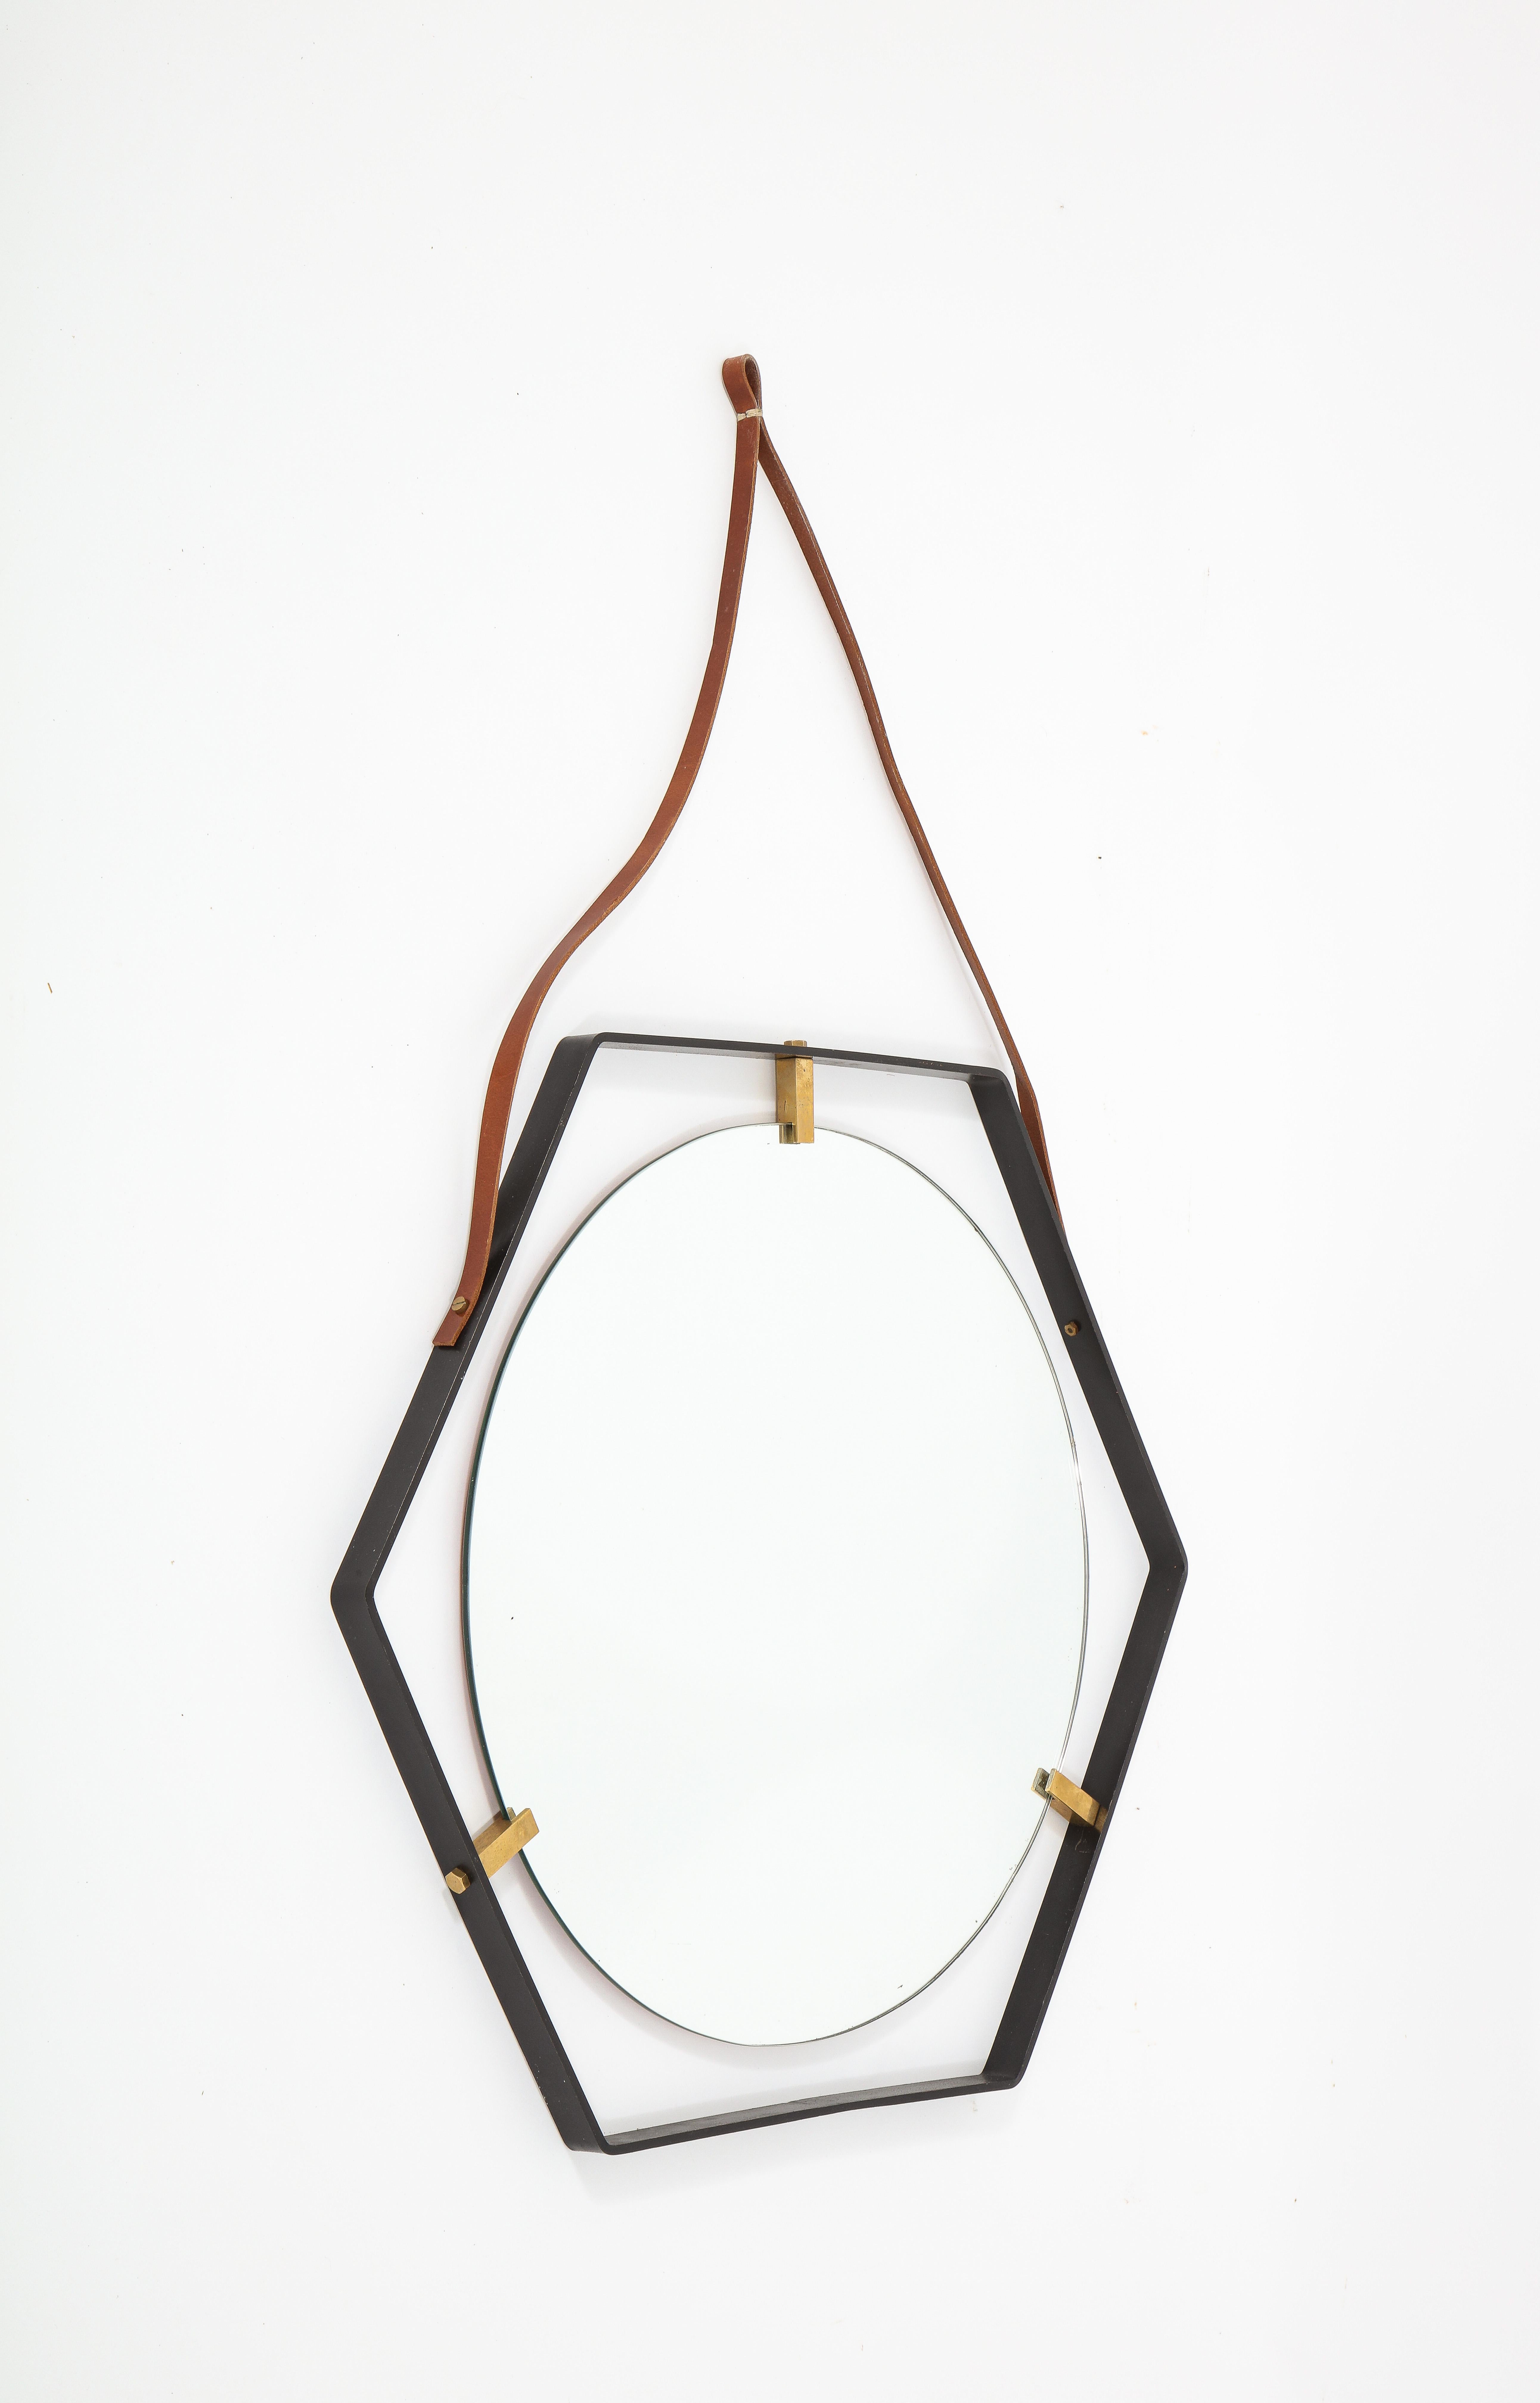 Octagonal Wrought Iron Mirror on Leather Strap, France 1960's For Sale 5